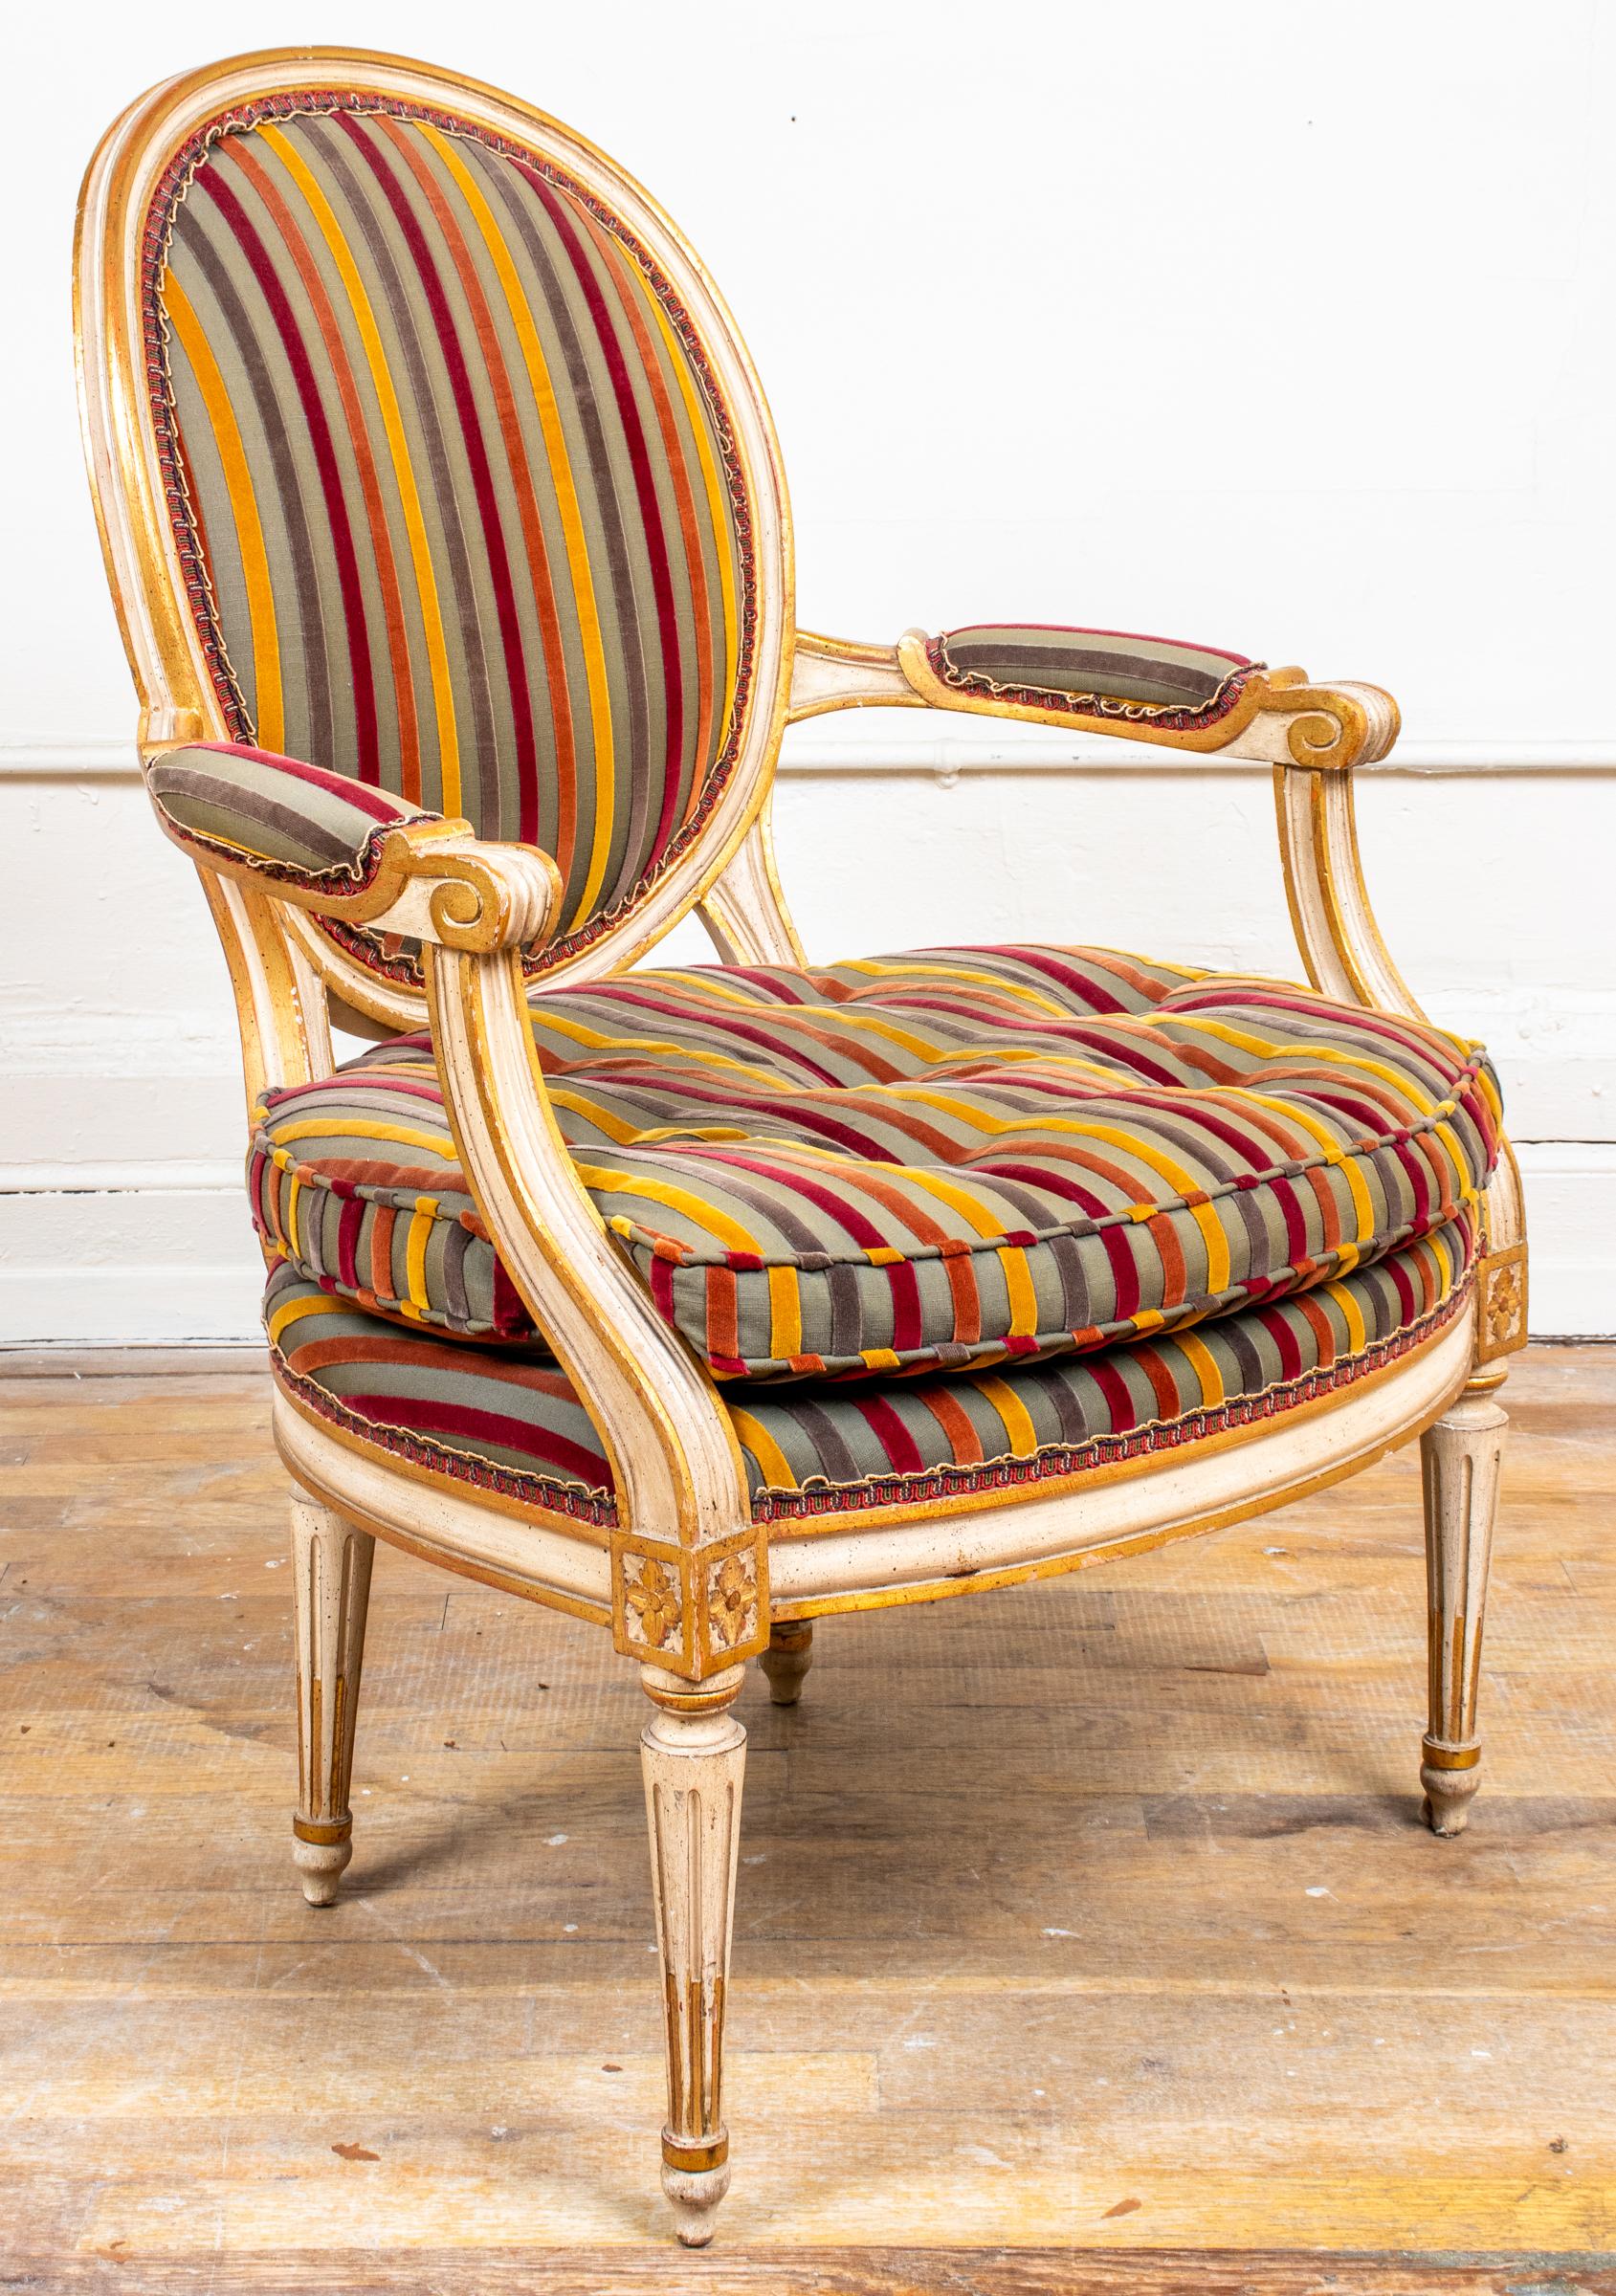 Pair of Louis XVI style fauteuils, the frames parcel gilt and cream painted around the oval backs and cushioned seats with striped velvet upholstery, the scrolling arms with rosette block details above fluted tapered legs. Measures: 35” H x 25” W x